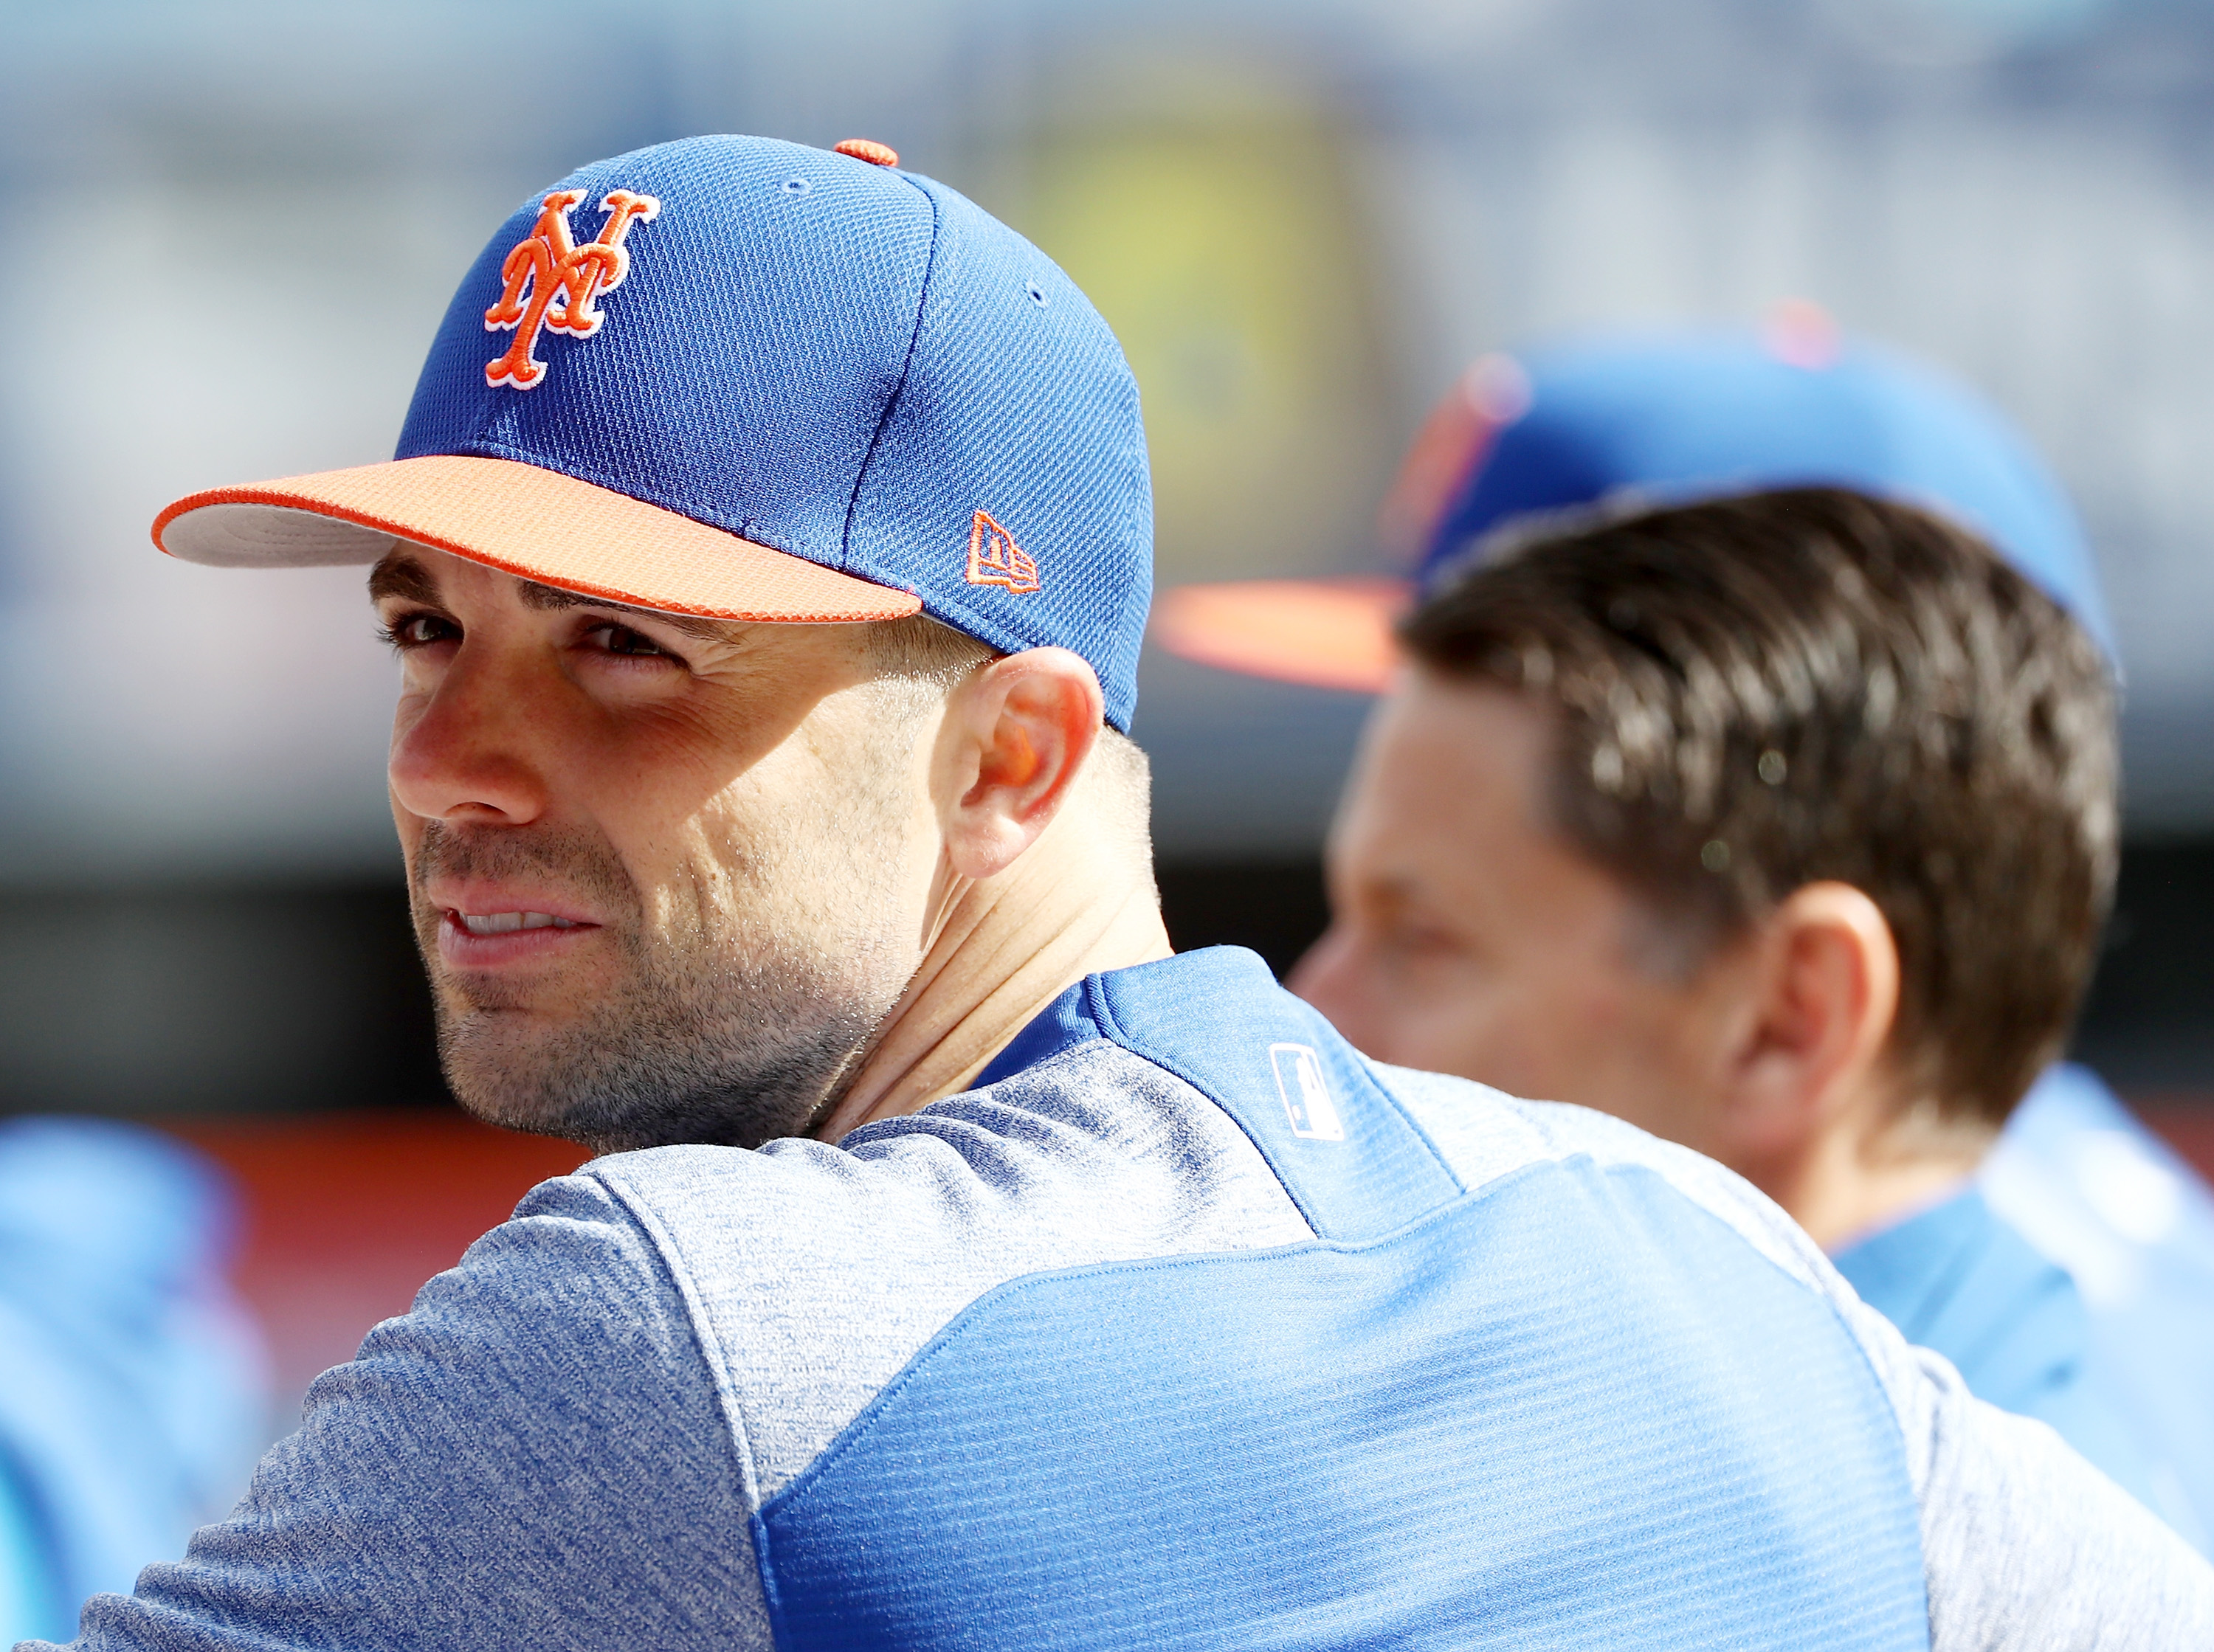 Mets' David Wright Has First At-Bat Since 2016 - The New York Times